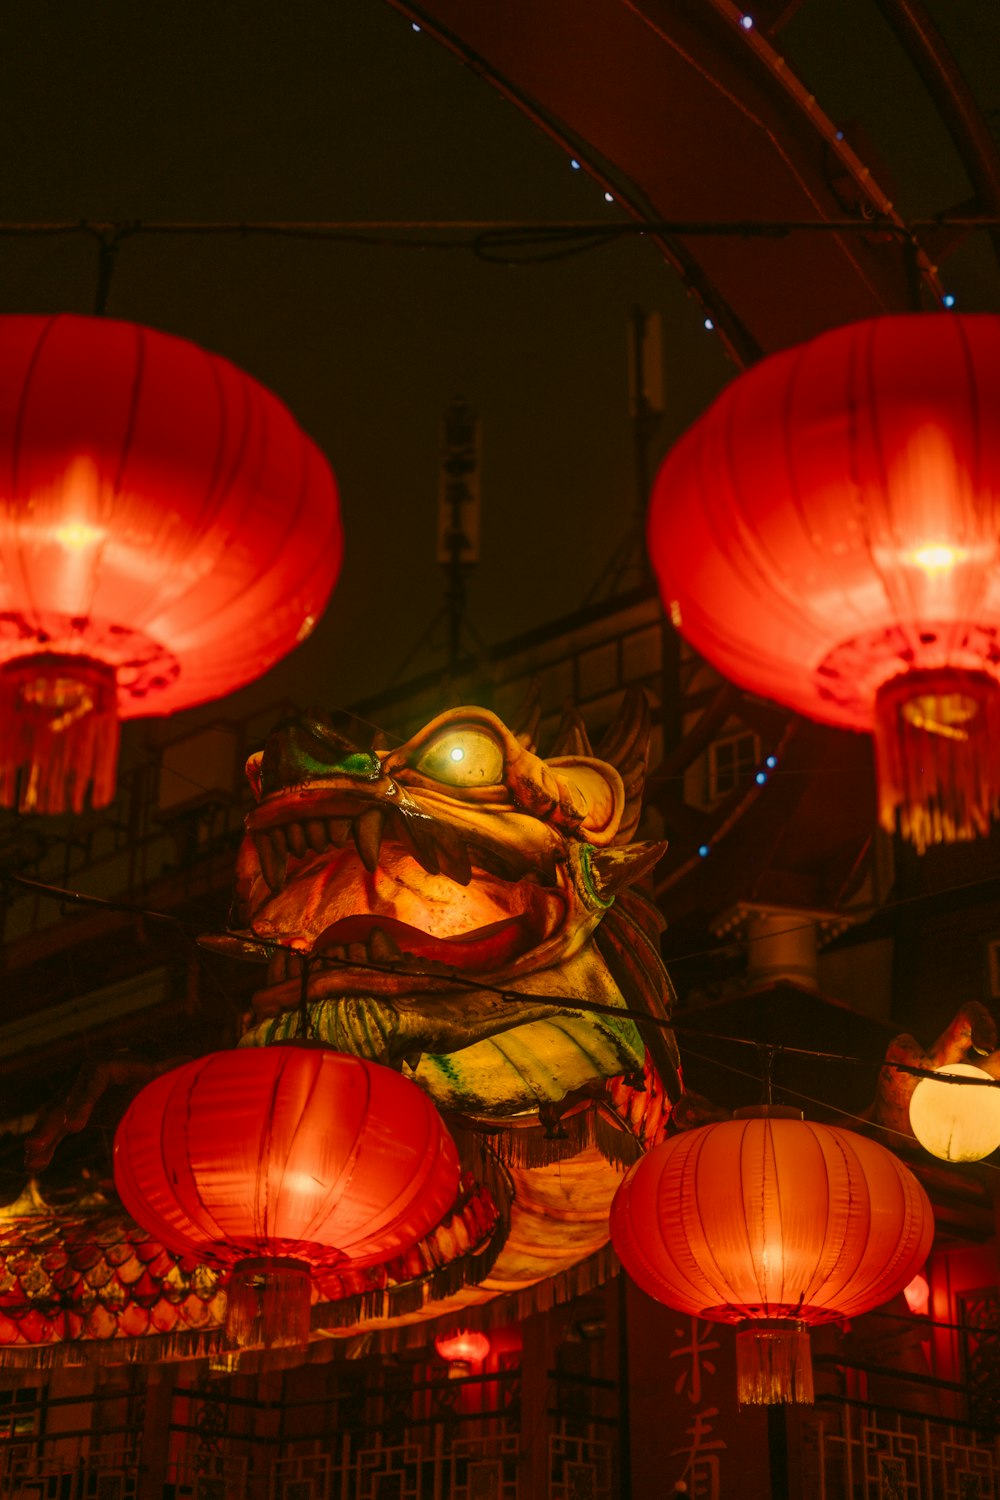 a dragon statue surrounded by red lanterns at night